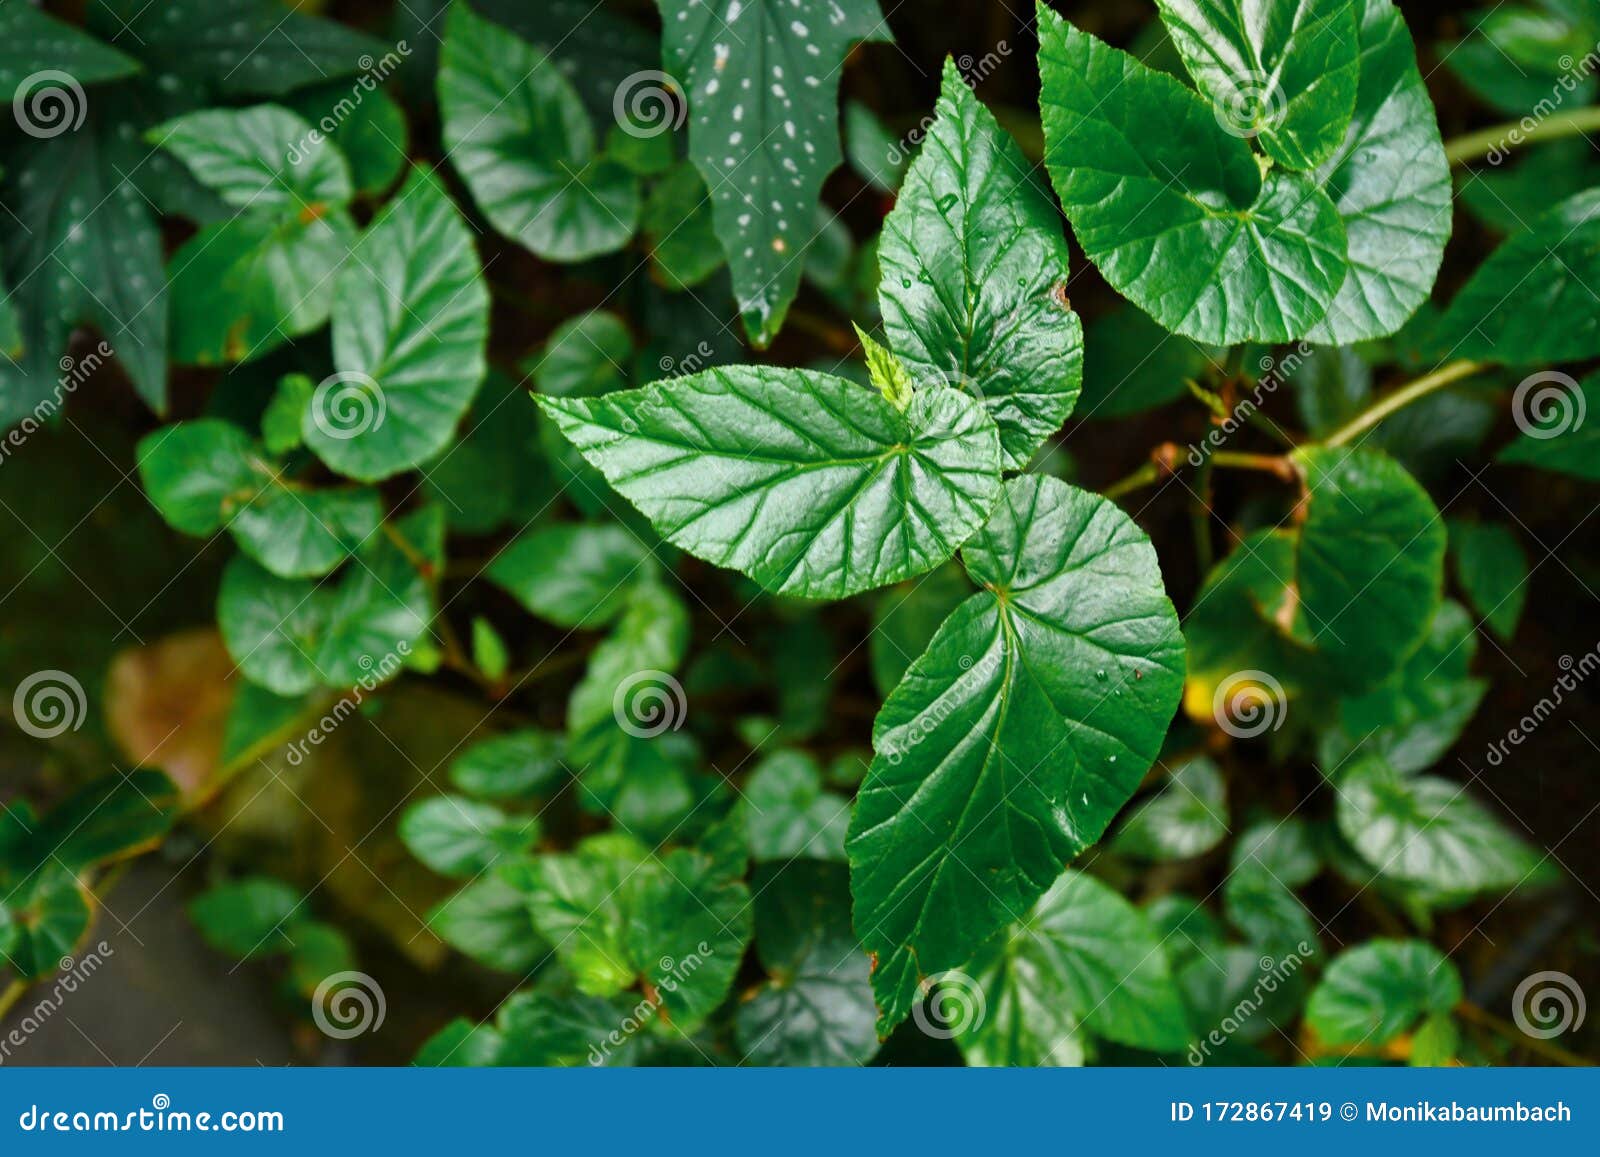 `begonia domingensis` exotic plant with shiny crinkled leaves